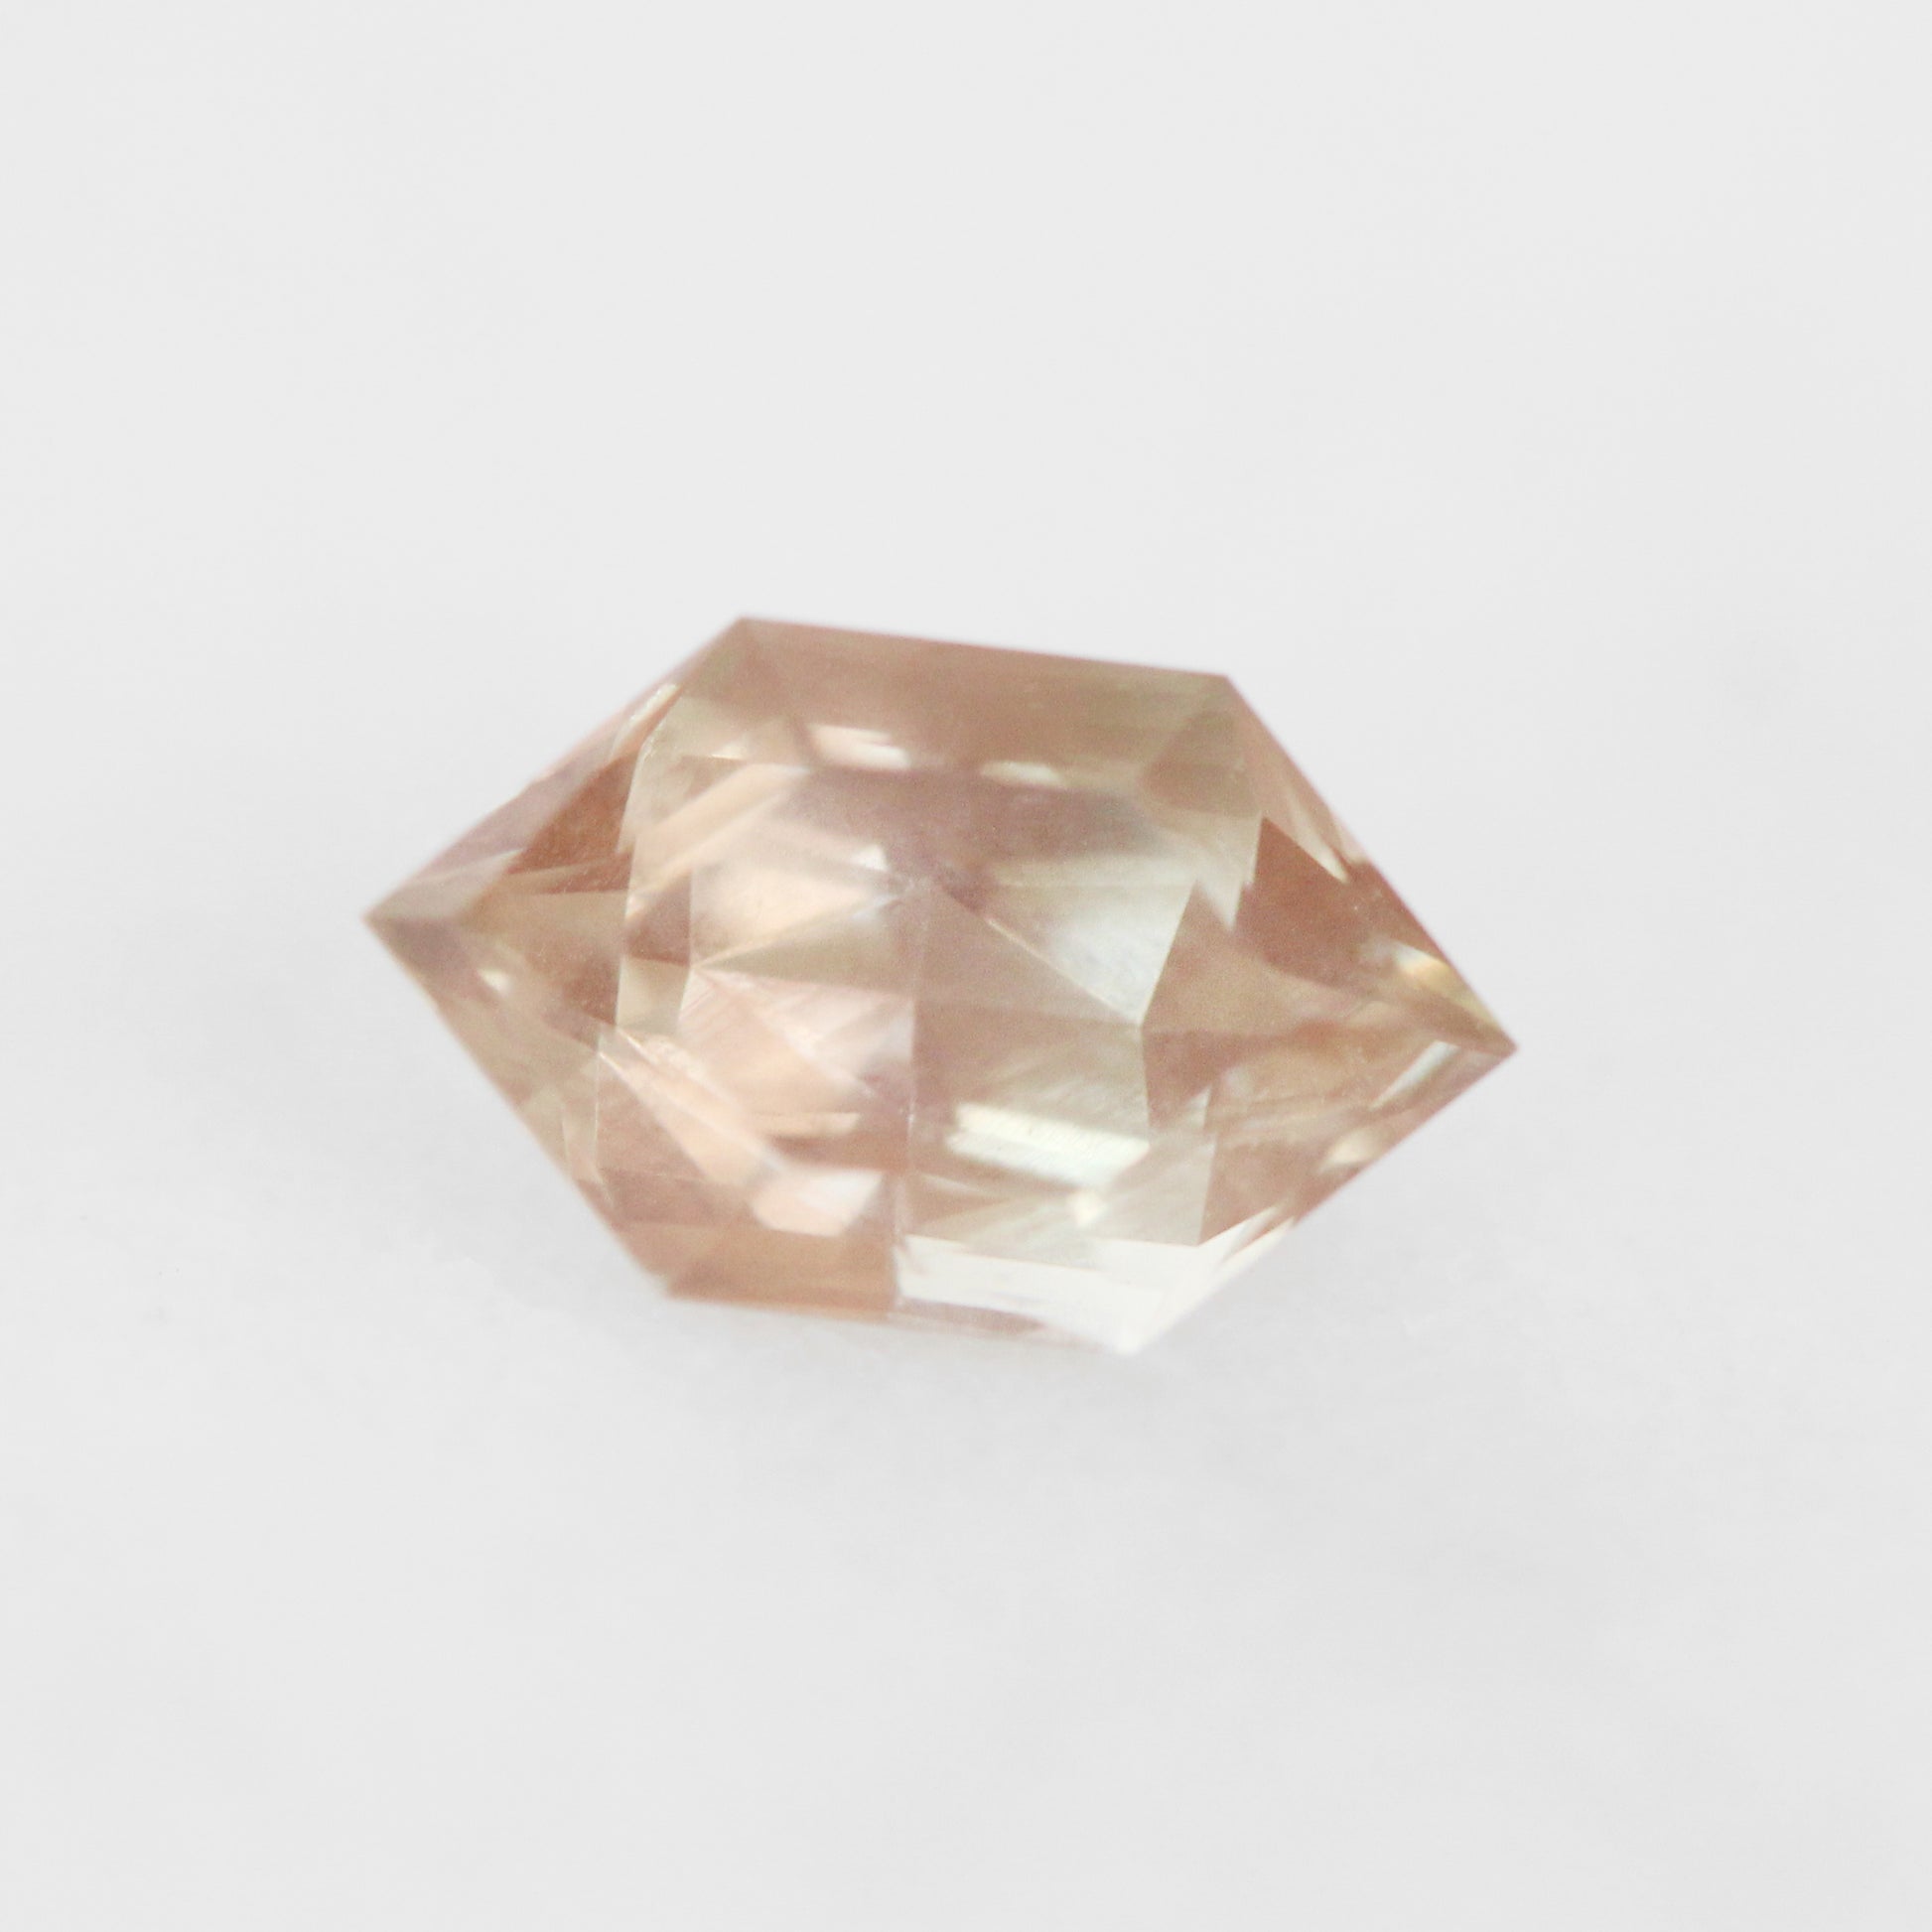 2.52ct Oregon Sunstone for Custom Work - Inventory Code SUN252 - Midwinter Co. Alternative Bridal Rings and Modern Fine Jewelry